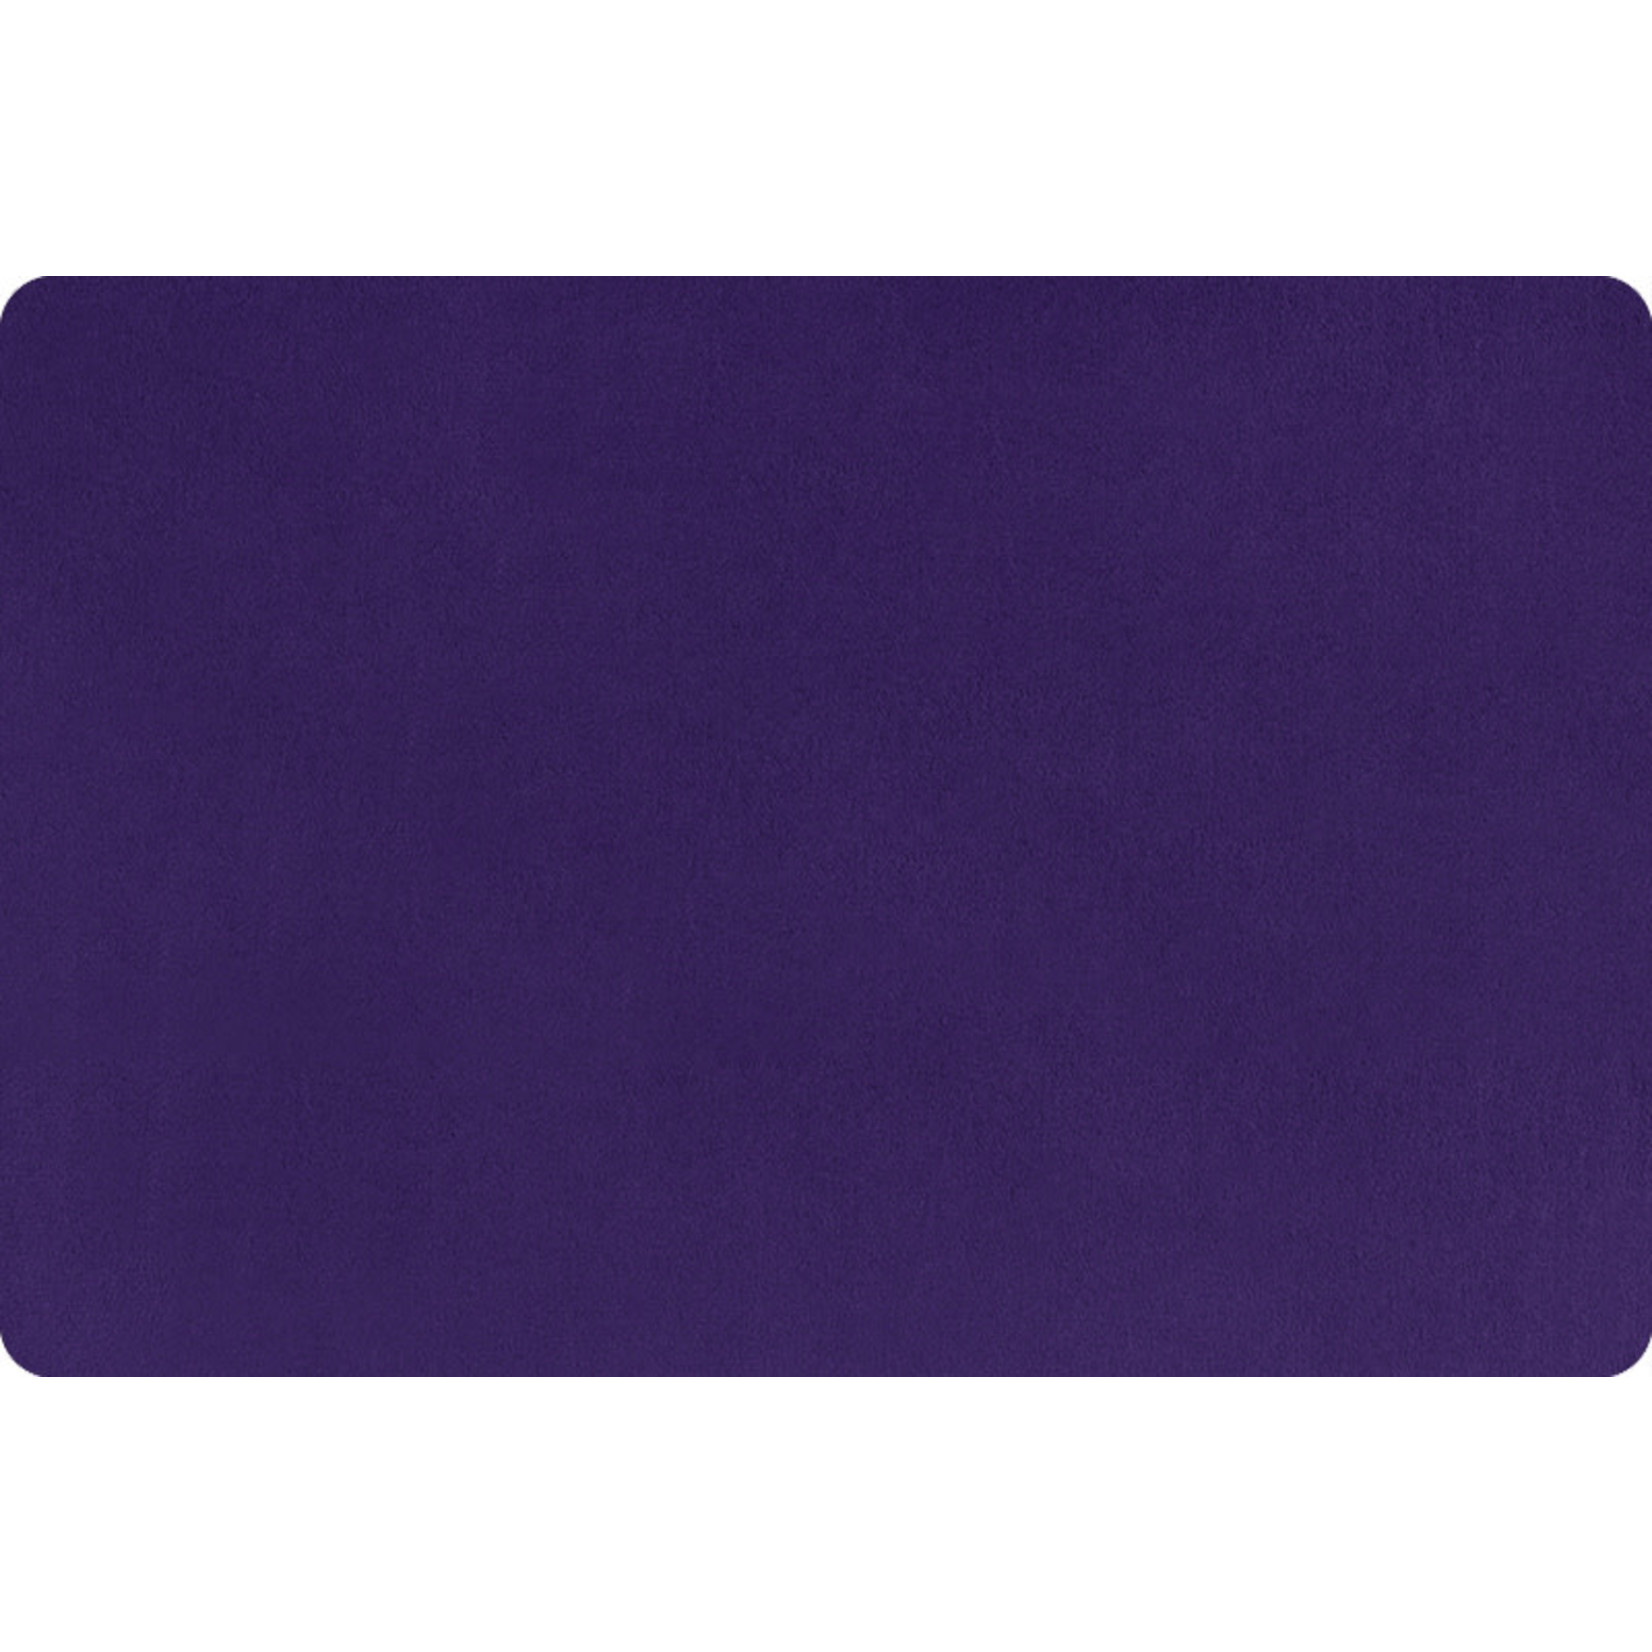 Shannon Fabrics Minky, Extra Wide Solid Cuddle3, 90" Eggplant, (by the inch)